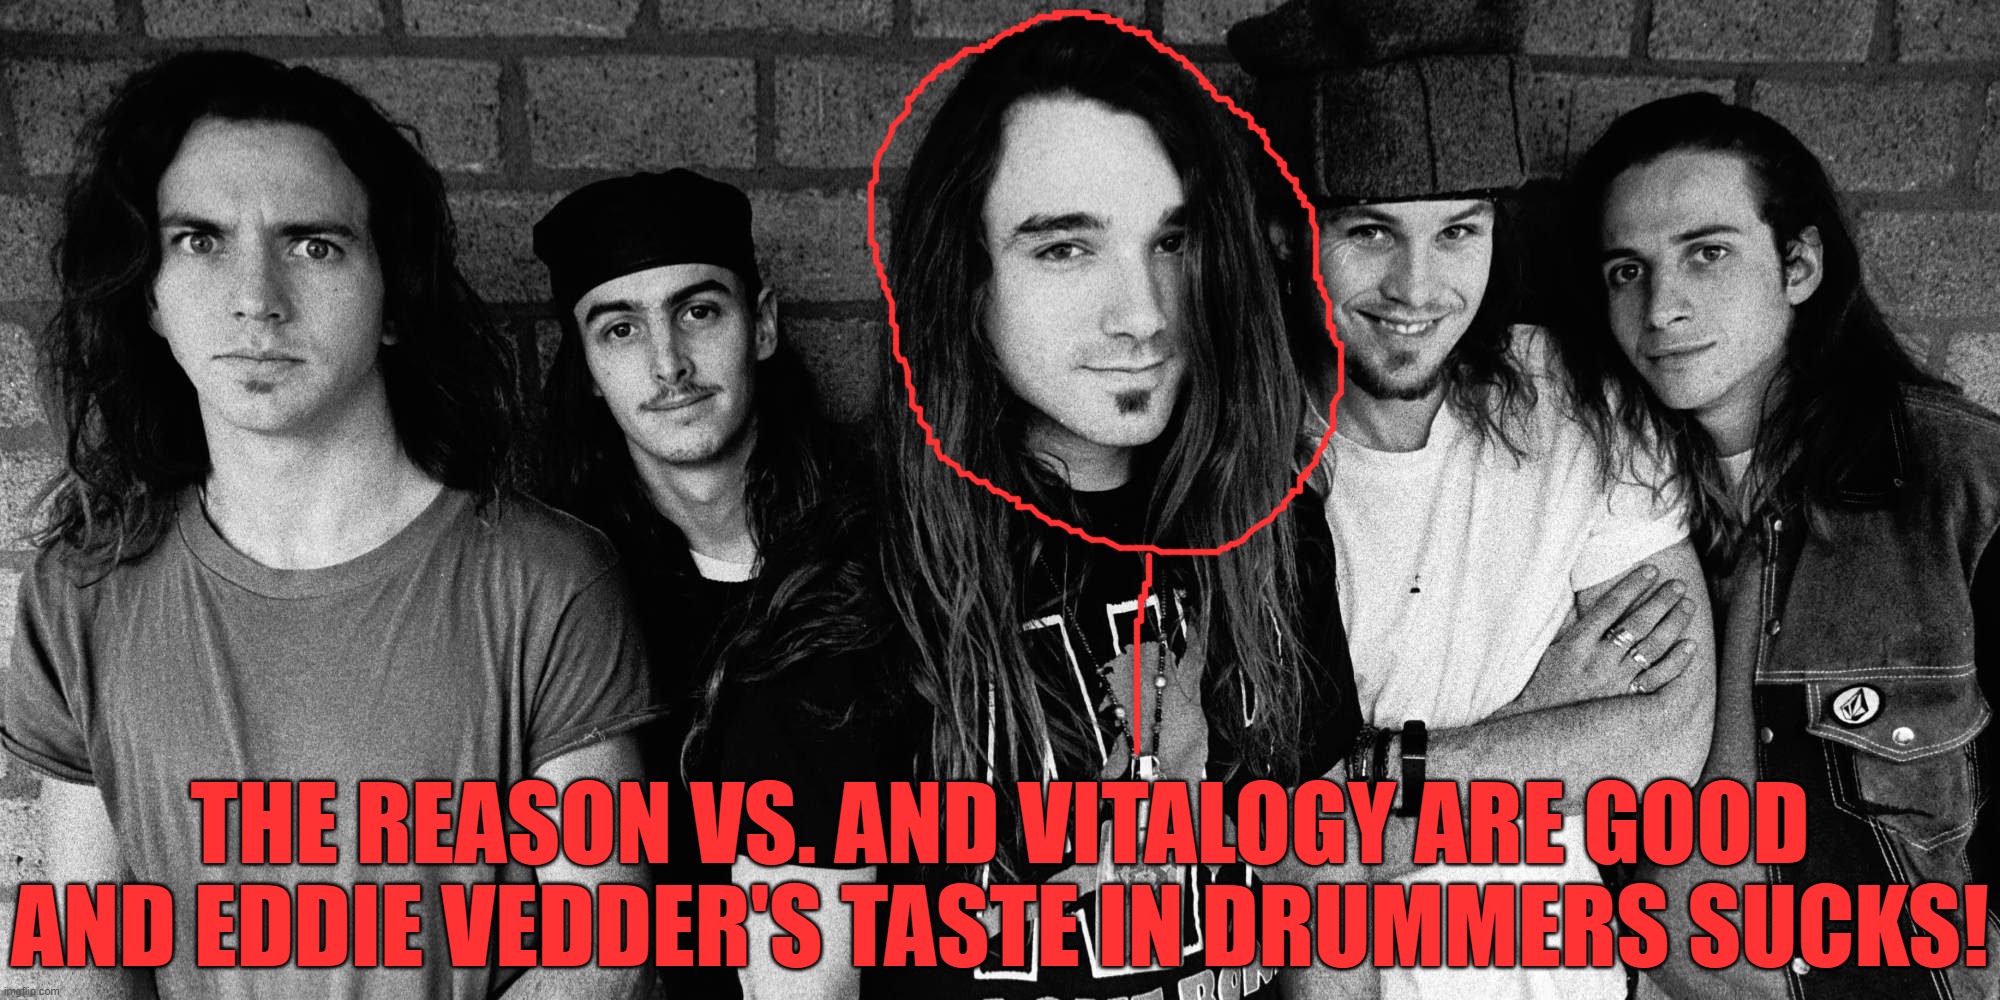 With Abbruzzese | THE REASON VS. AND VITALOGY ARE GOOD AND EDDIE VEDDER'S TASTE IN DRUMMERS SUCKS! | image tagged in pearl jam,good drummer,jamming | made w/ Imgflip meme maker